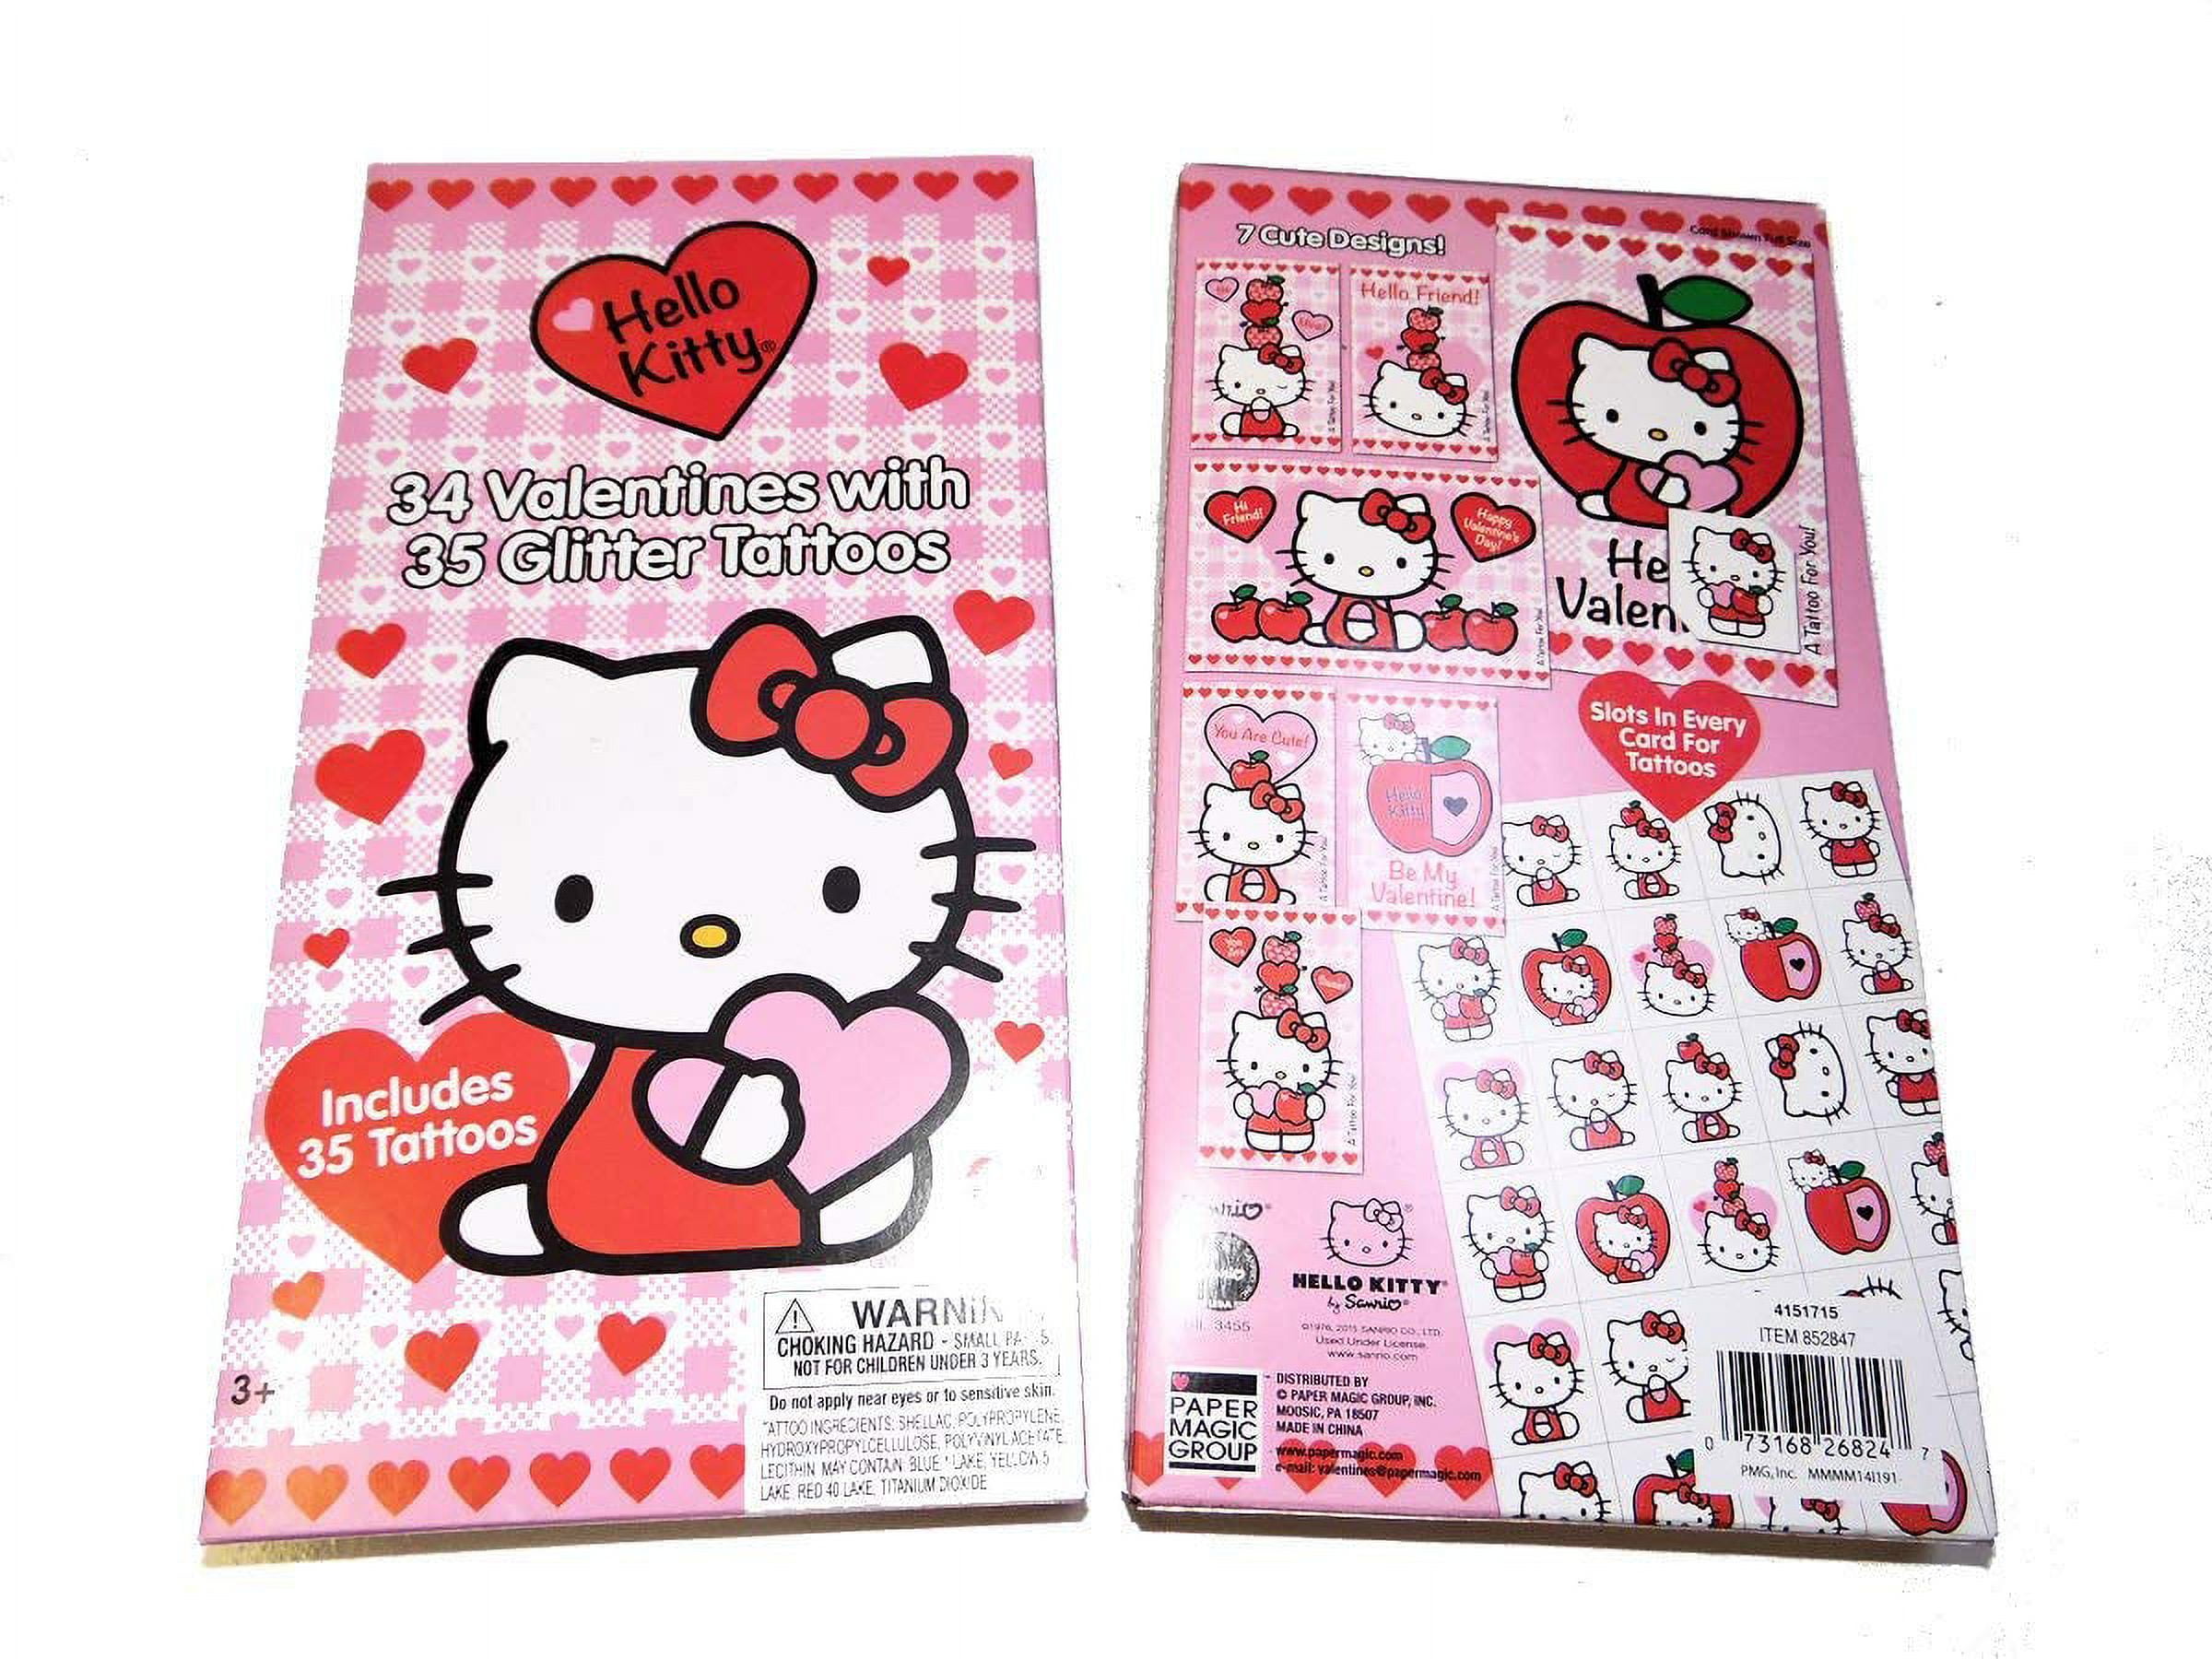 Sanrio Valentine's Day Cards - Set of 6 4x3 - Cards & Stationery